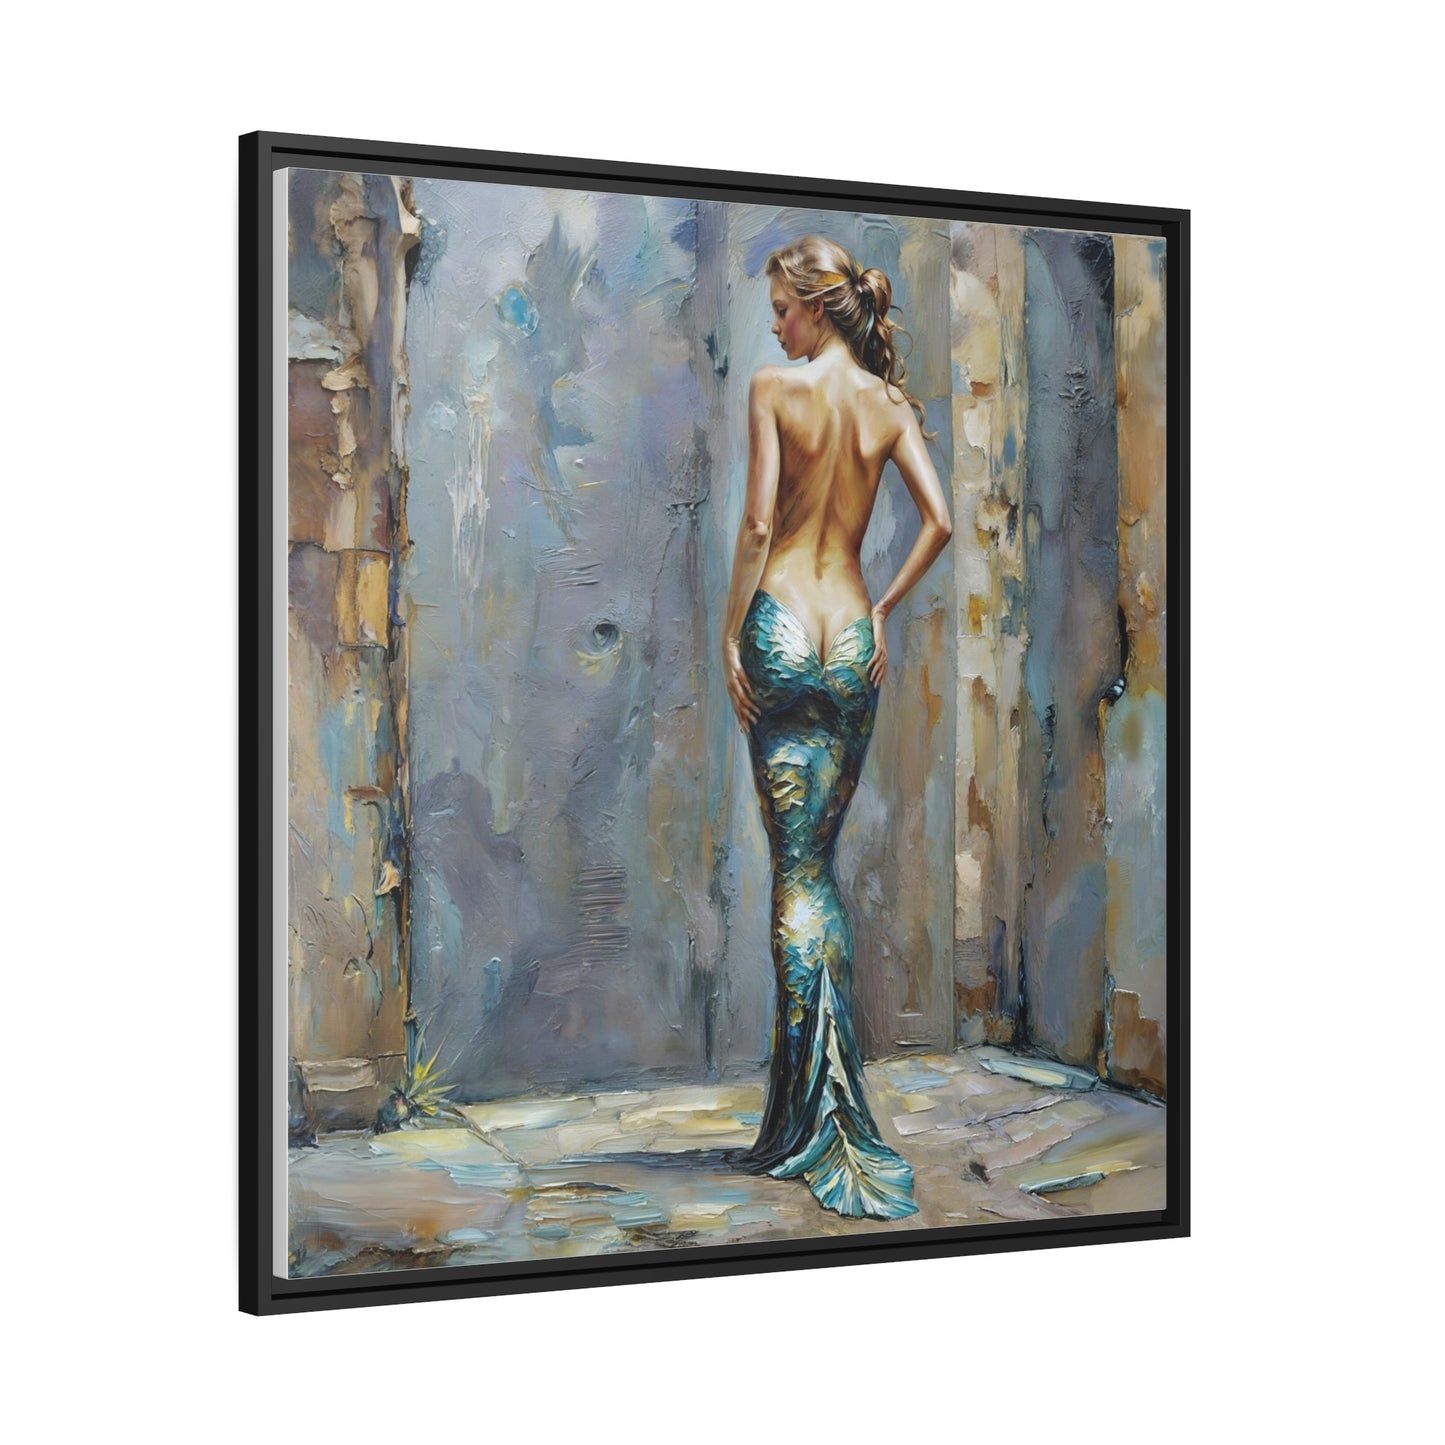 Mystique of the Urban Mermaid, Contemporary Mermaid Art Print, Enigmatic Siren of the Streets Canvas, Modern Mythical Beauty Wall Art